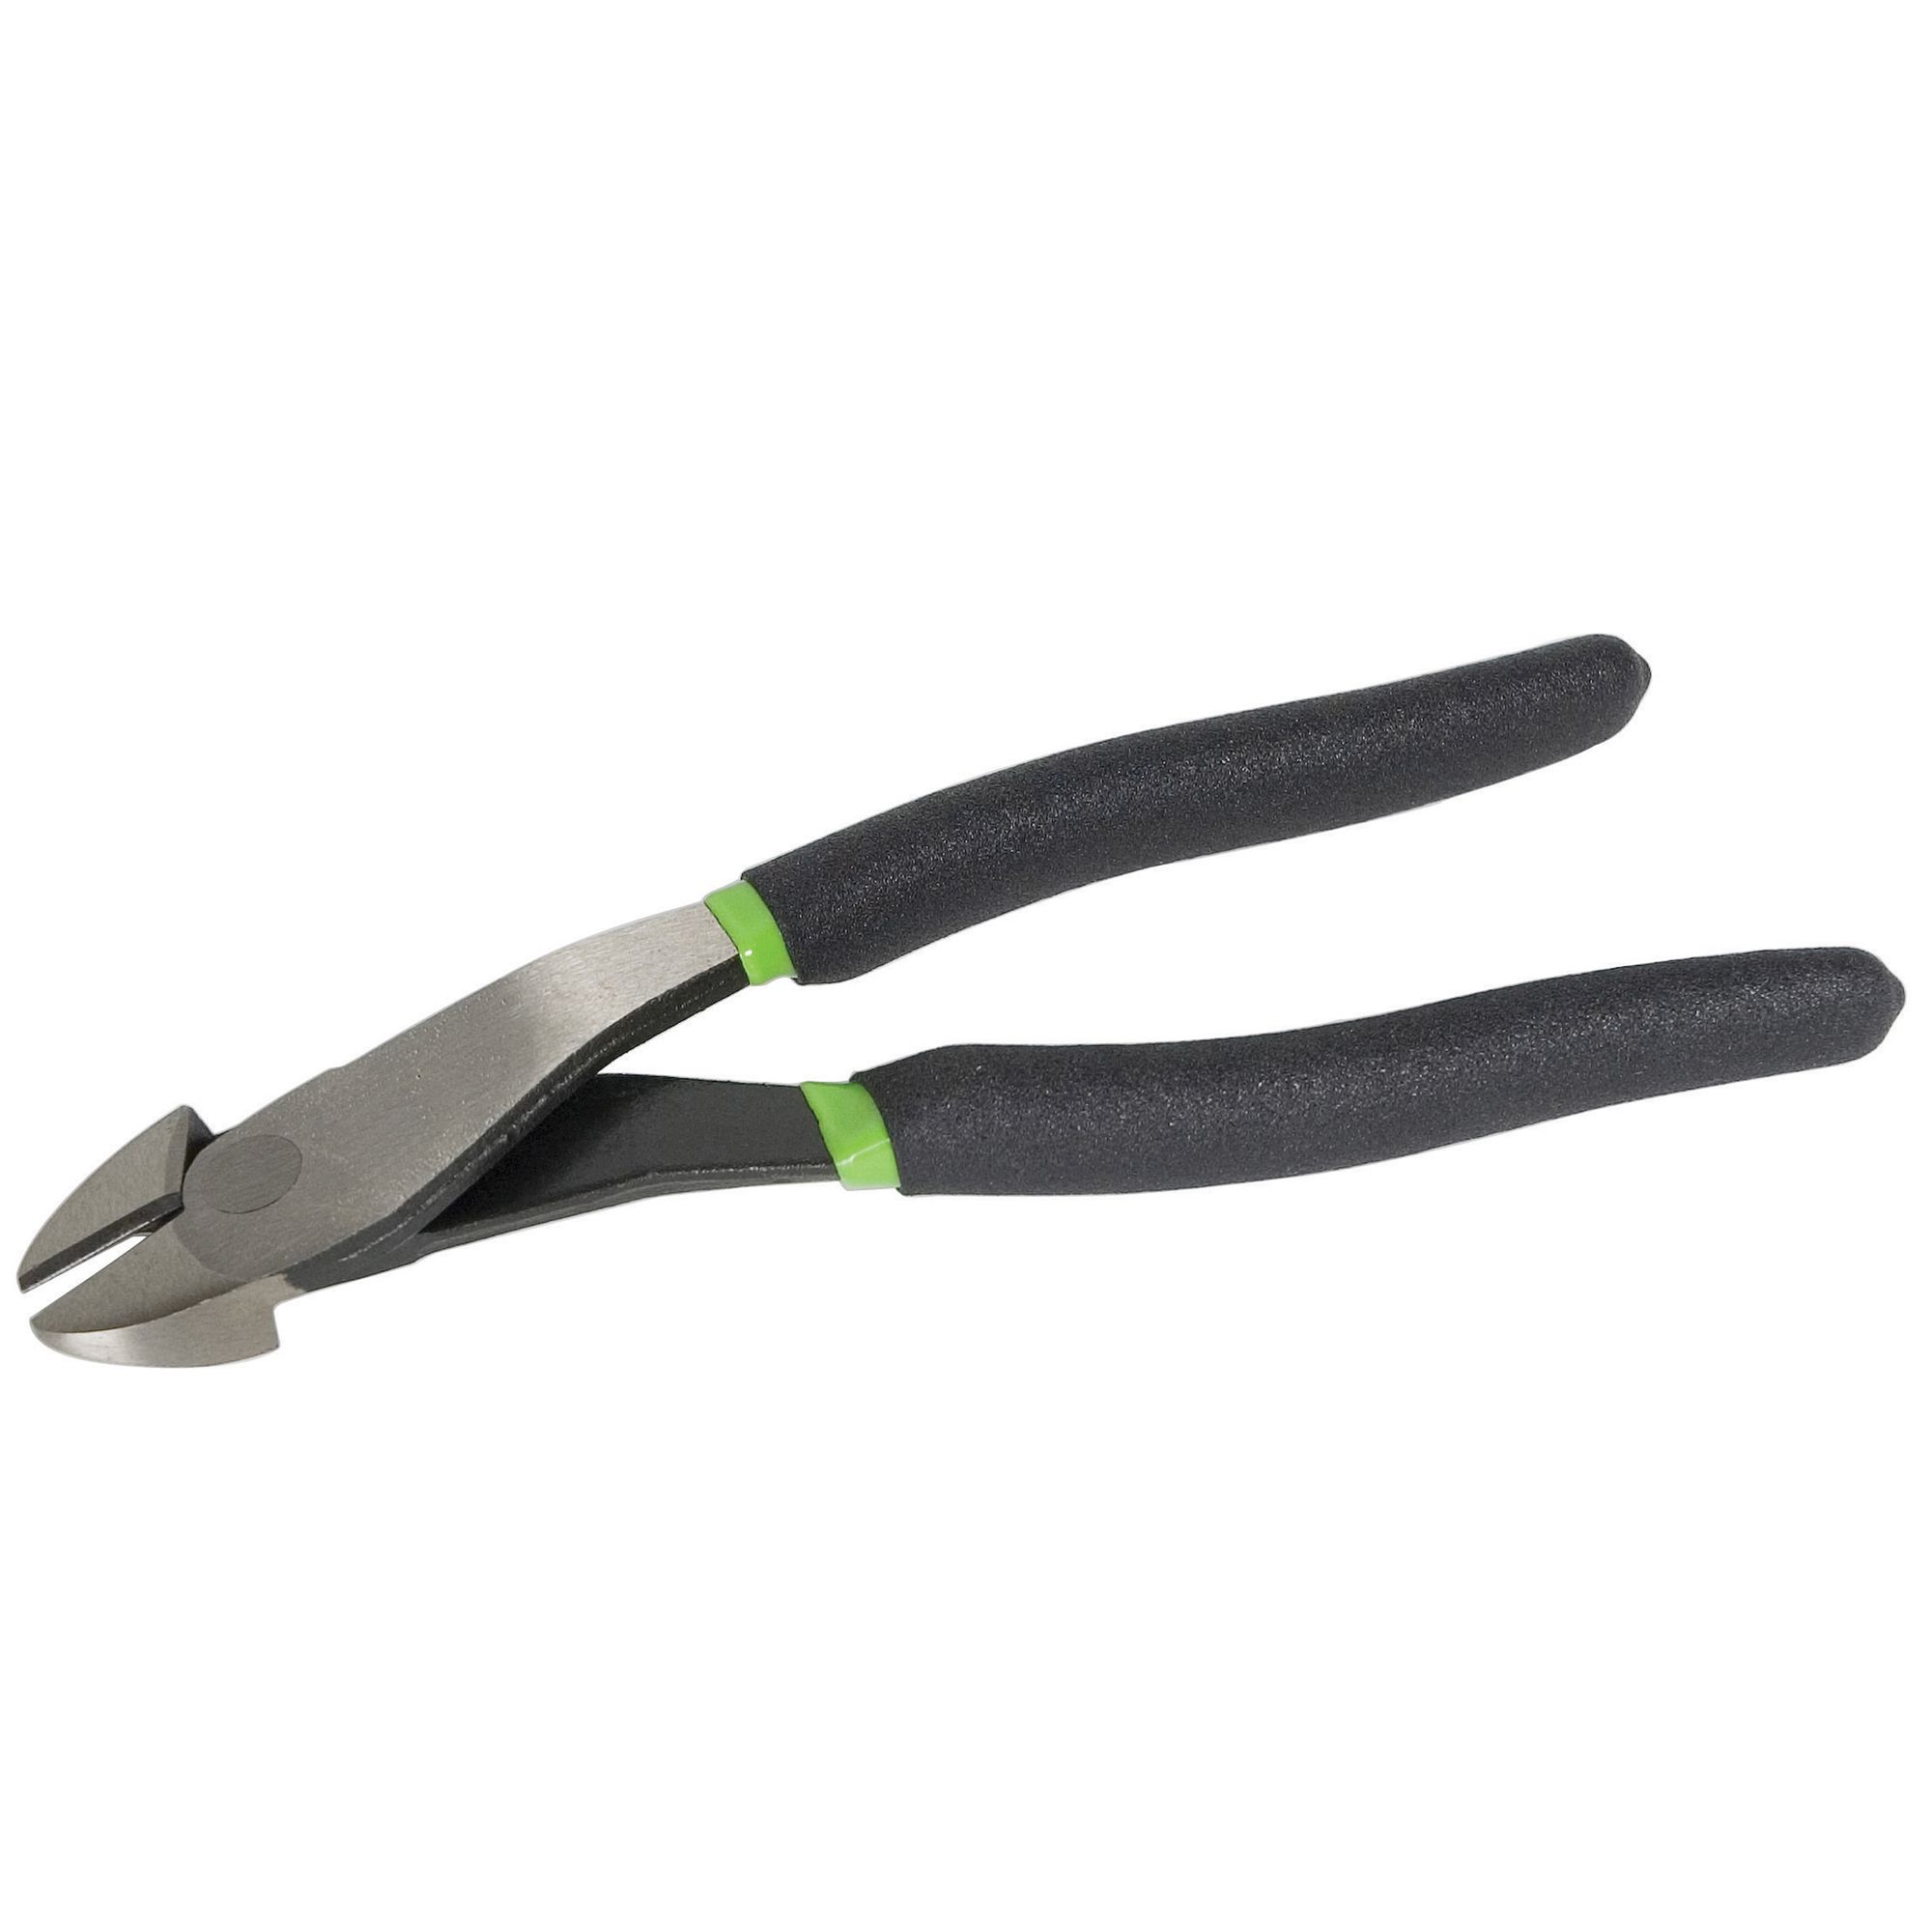 Greenlee 8 in. Diagonal Cutting Pliers with Dipped Grip